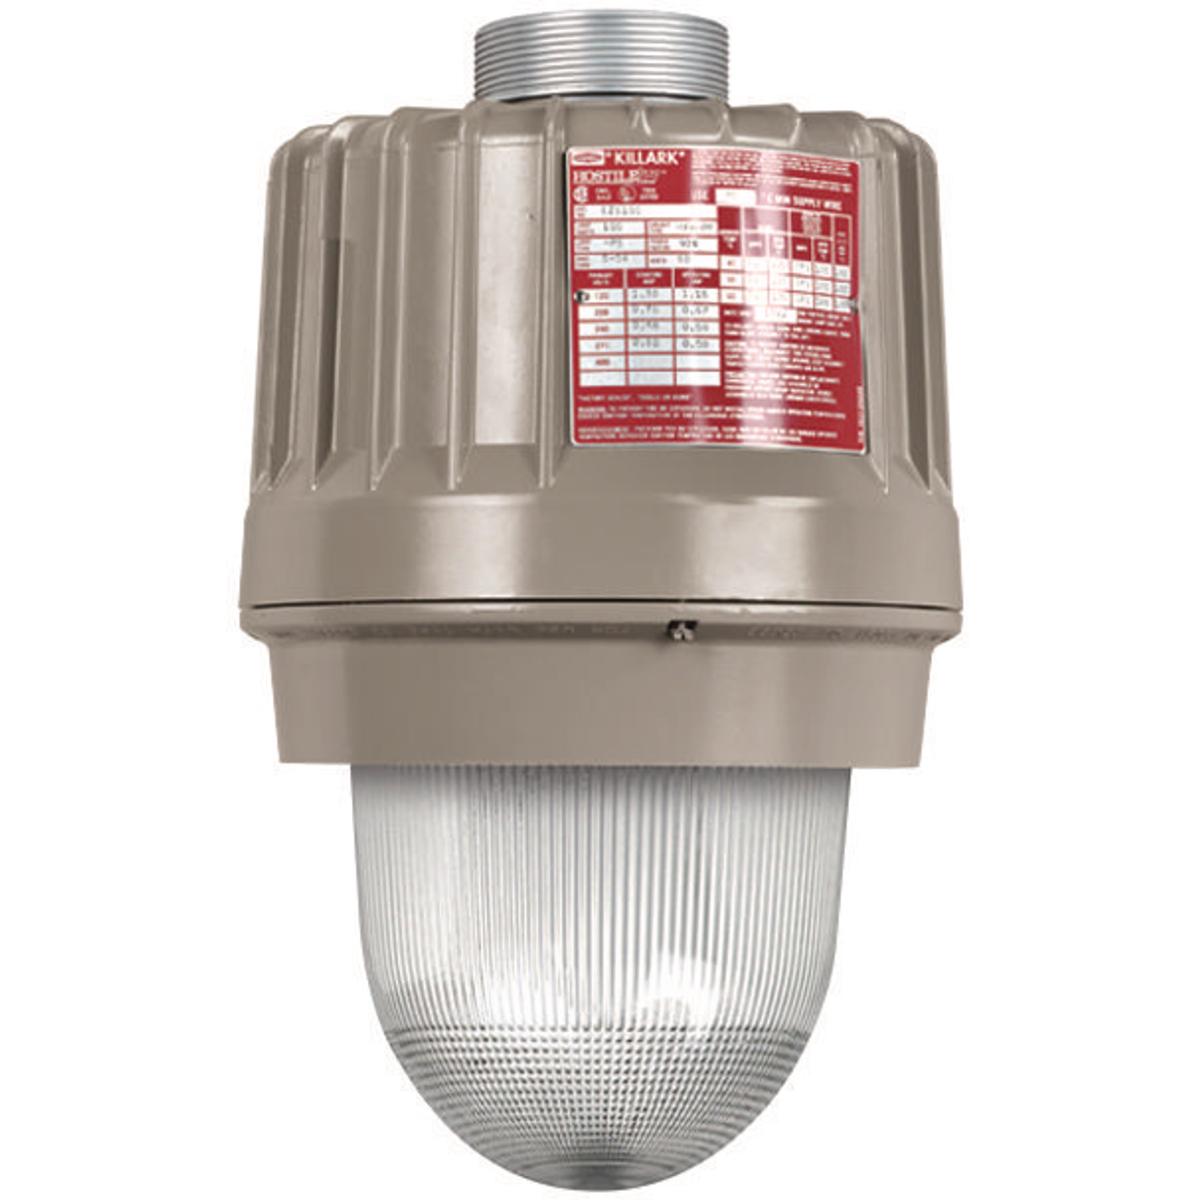 Hubbell EZS050 EZ Series - HPS Housing Globe & Globe Support Assemblies - 50Watts - 120/208/240/277 Volts  ; Three light sources – High Pressure Sodium (50-400W), Metal Halide (70-400W) and Pulse Start Metal Halide (175-400W) ; Mounting choice –Pendant, ceiling, 25˚ sta